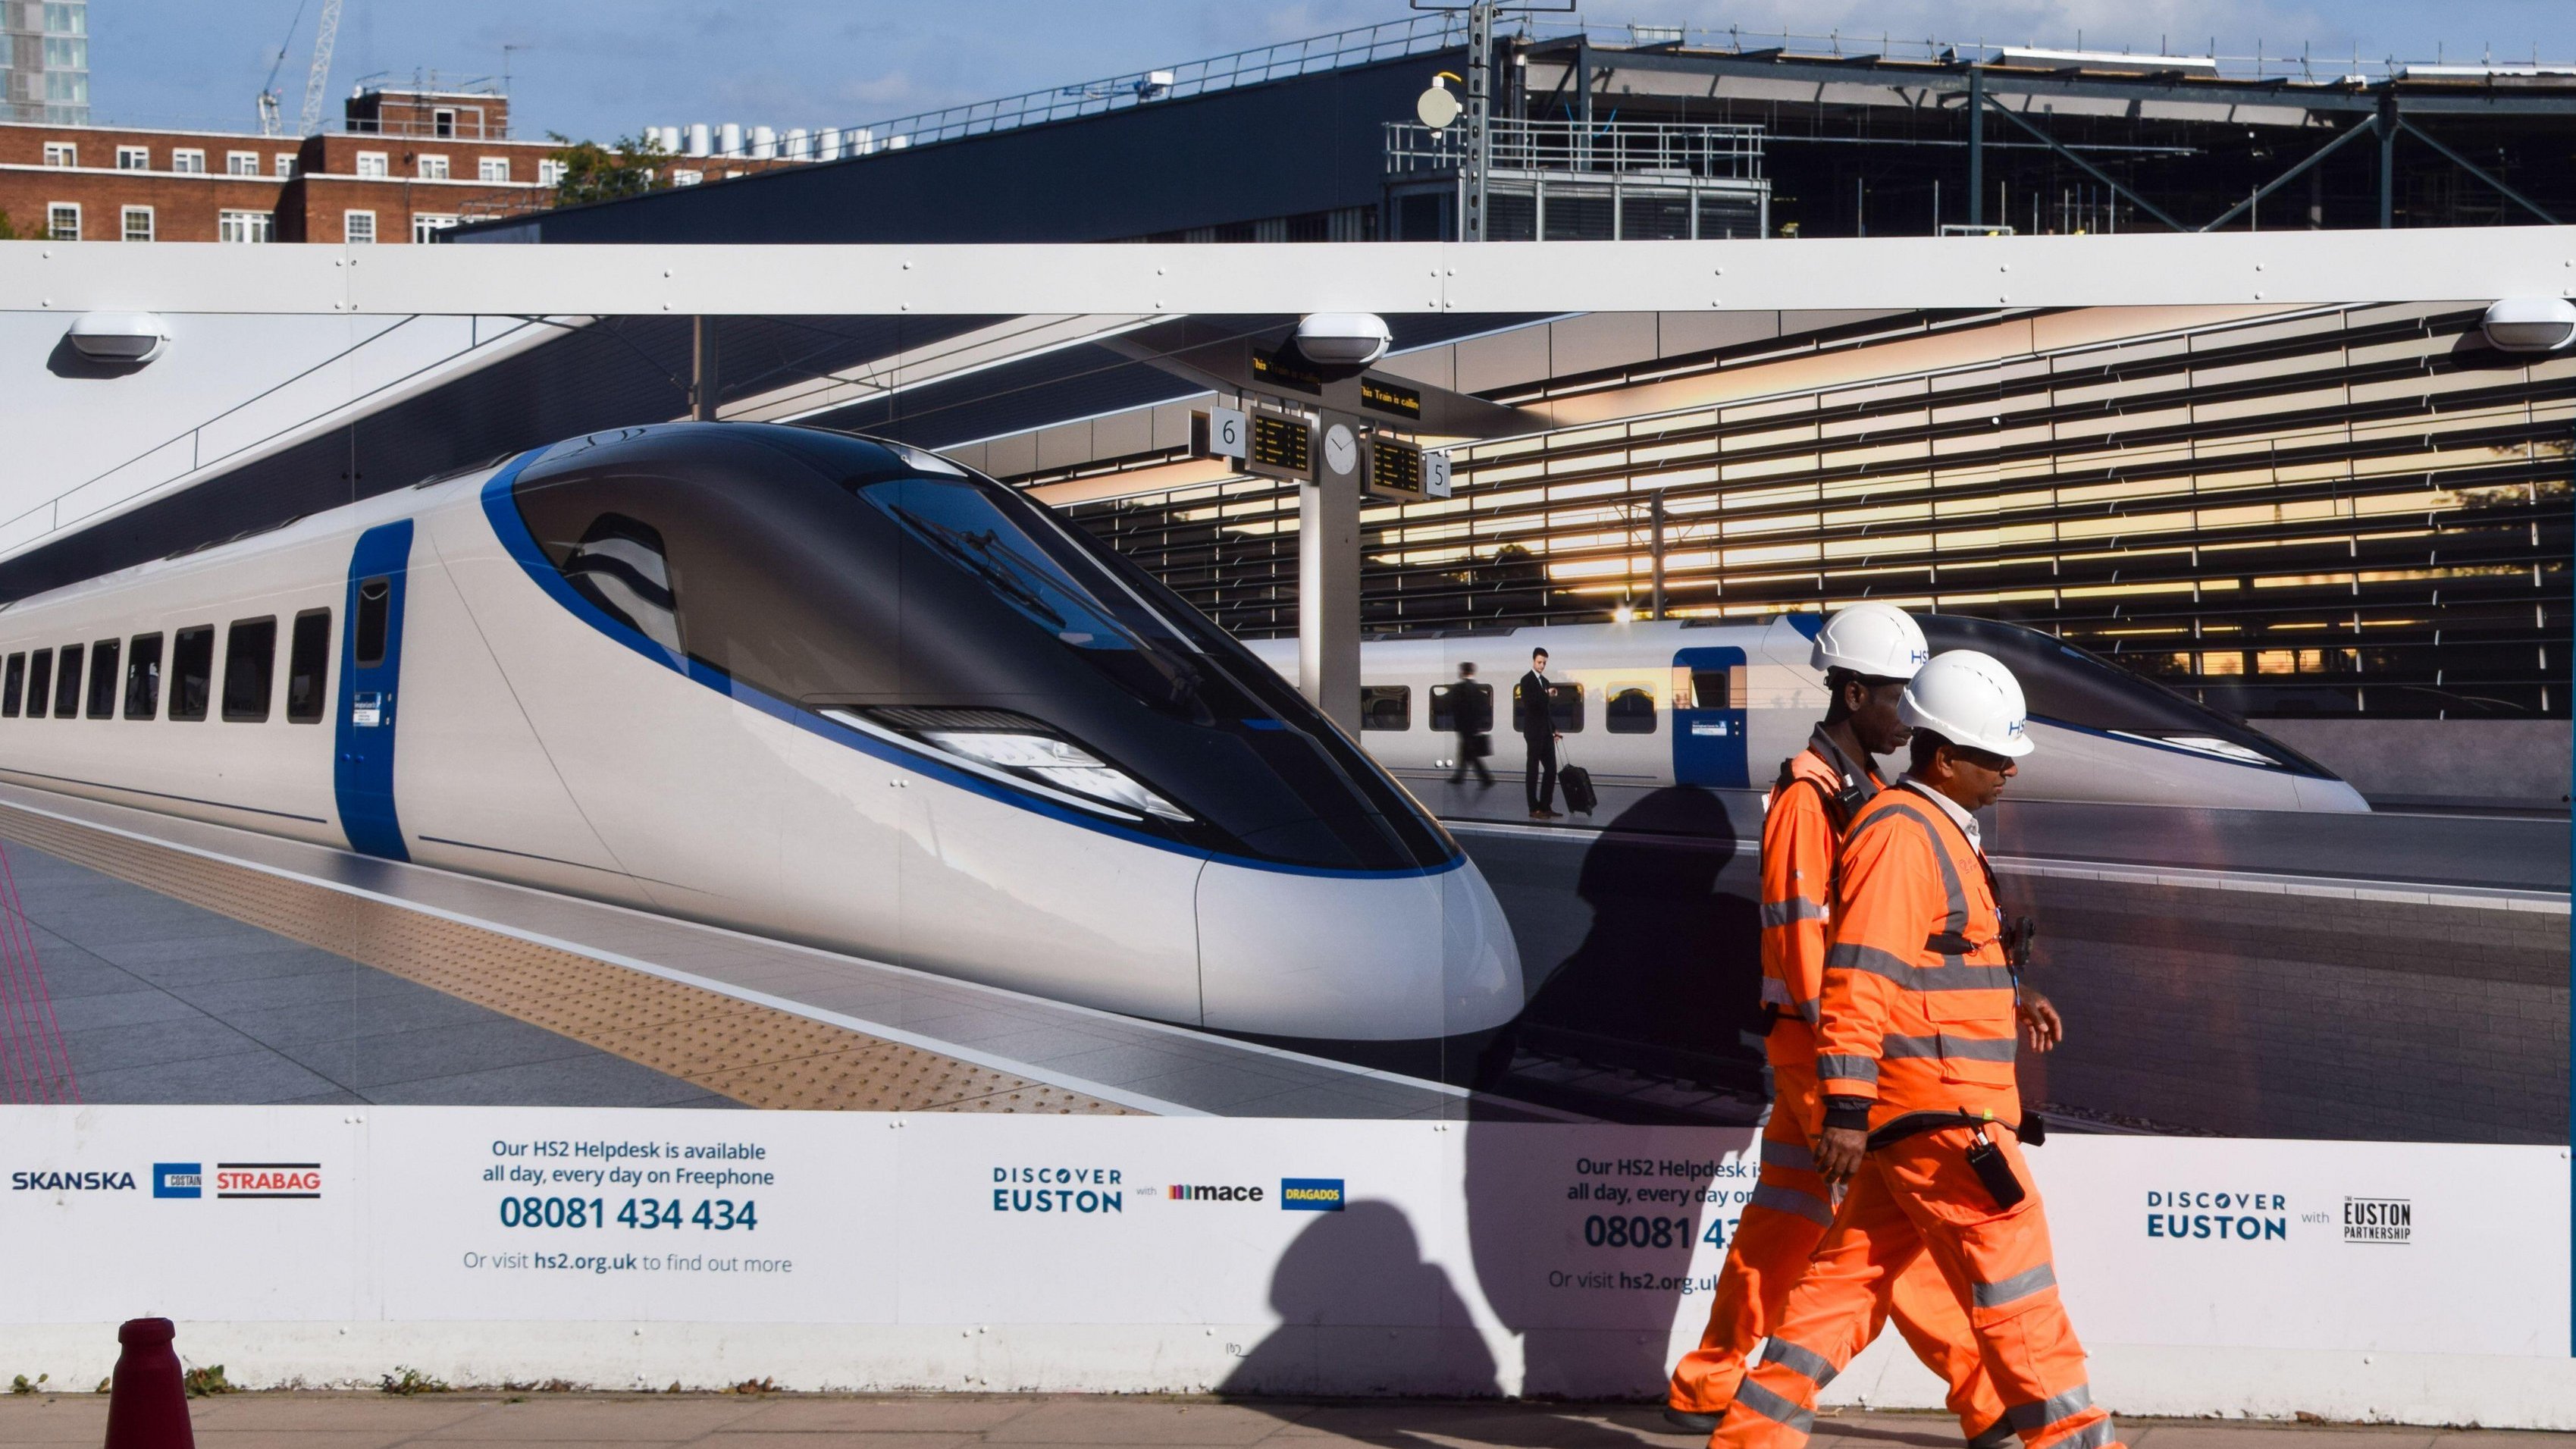 HS2 delays put hundreds of jobs in jeopardy at Alstom